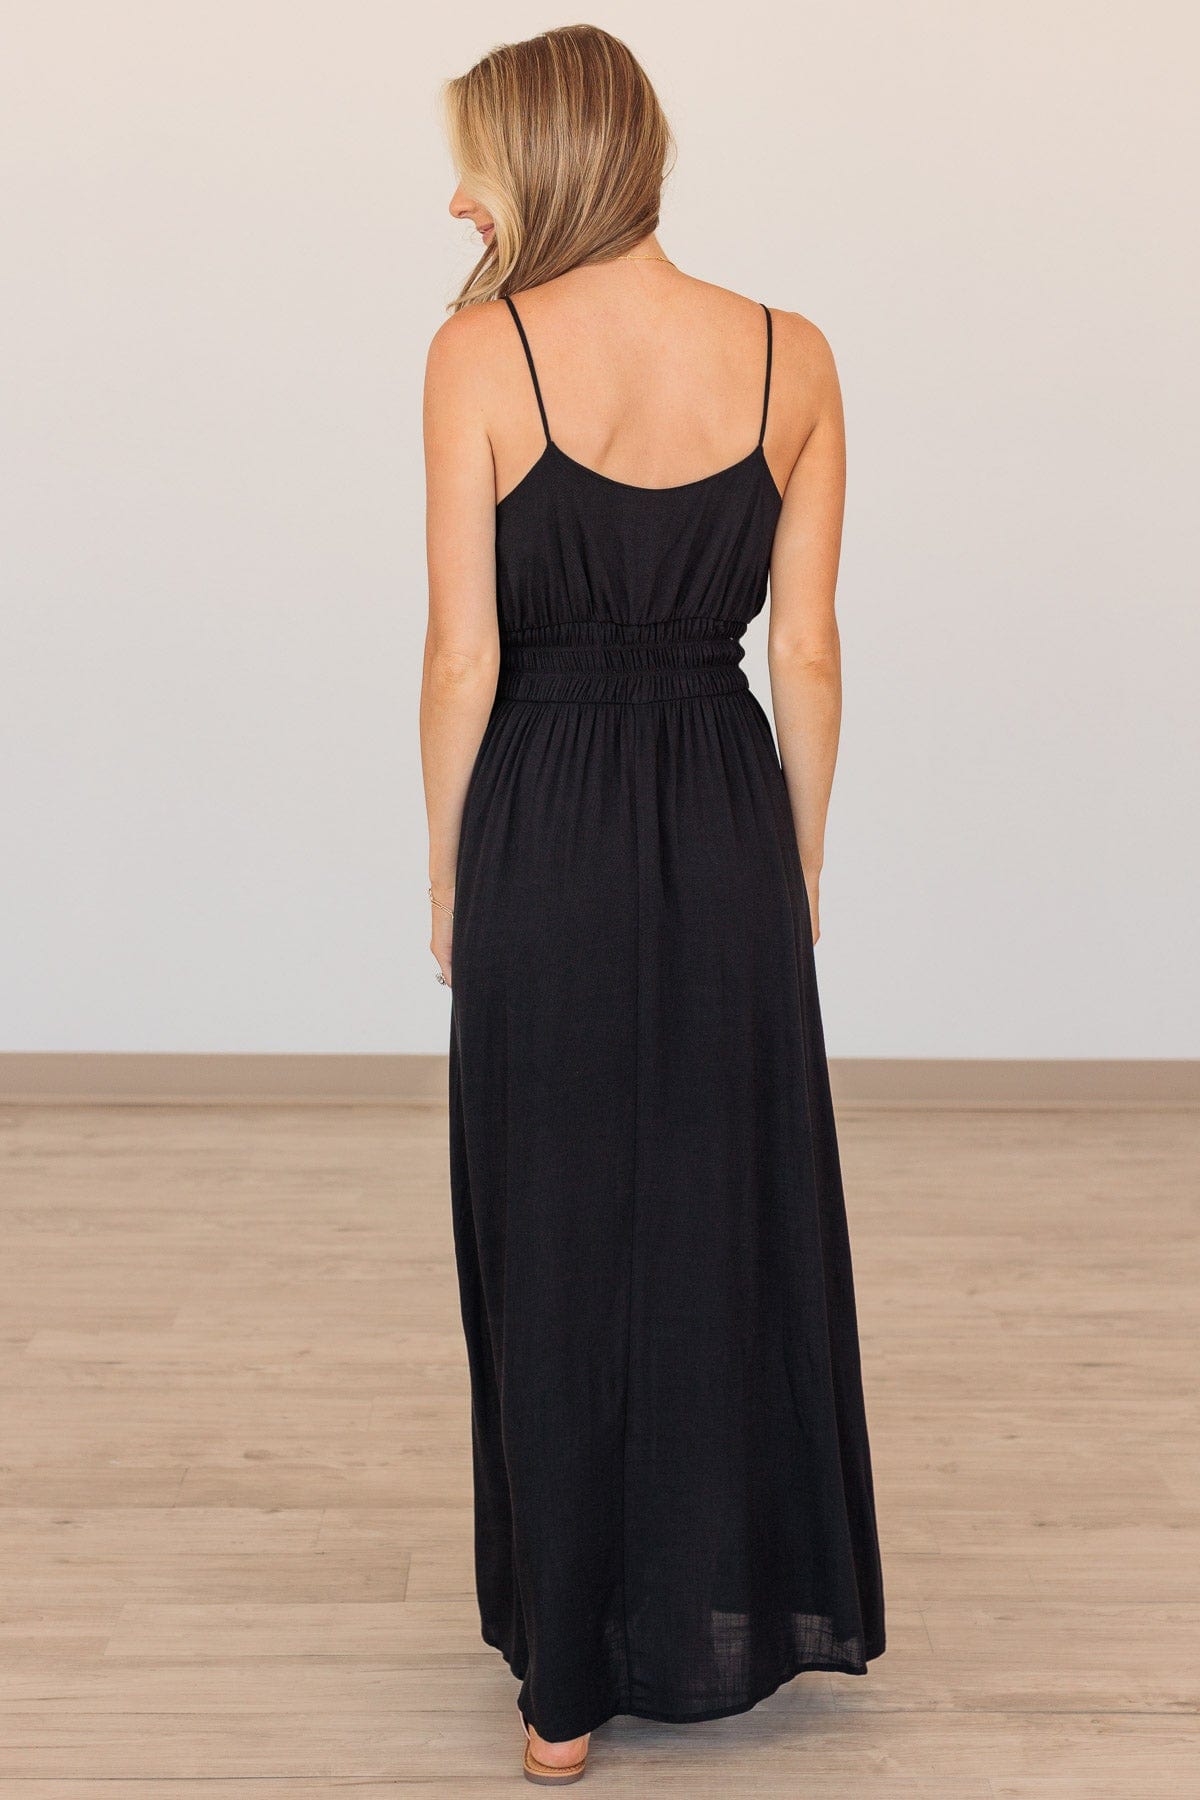 Looking For Someone Maxi Dress- Black